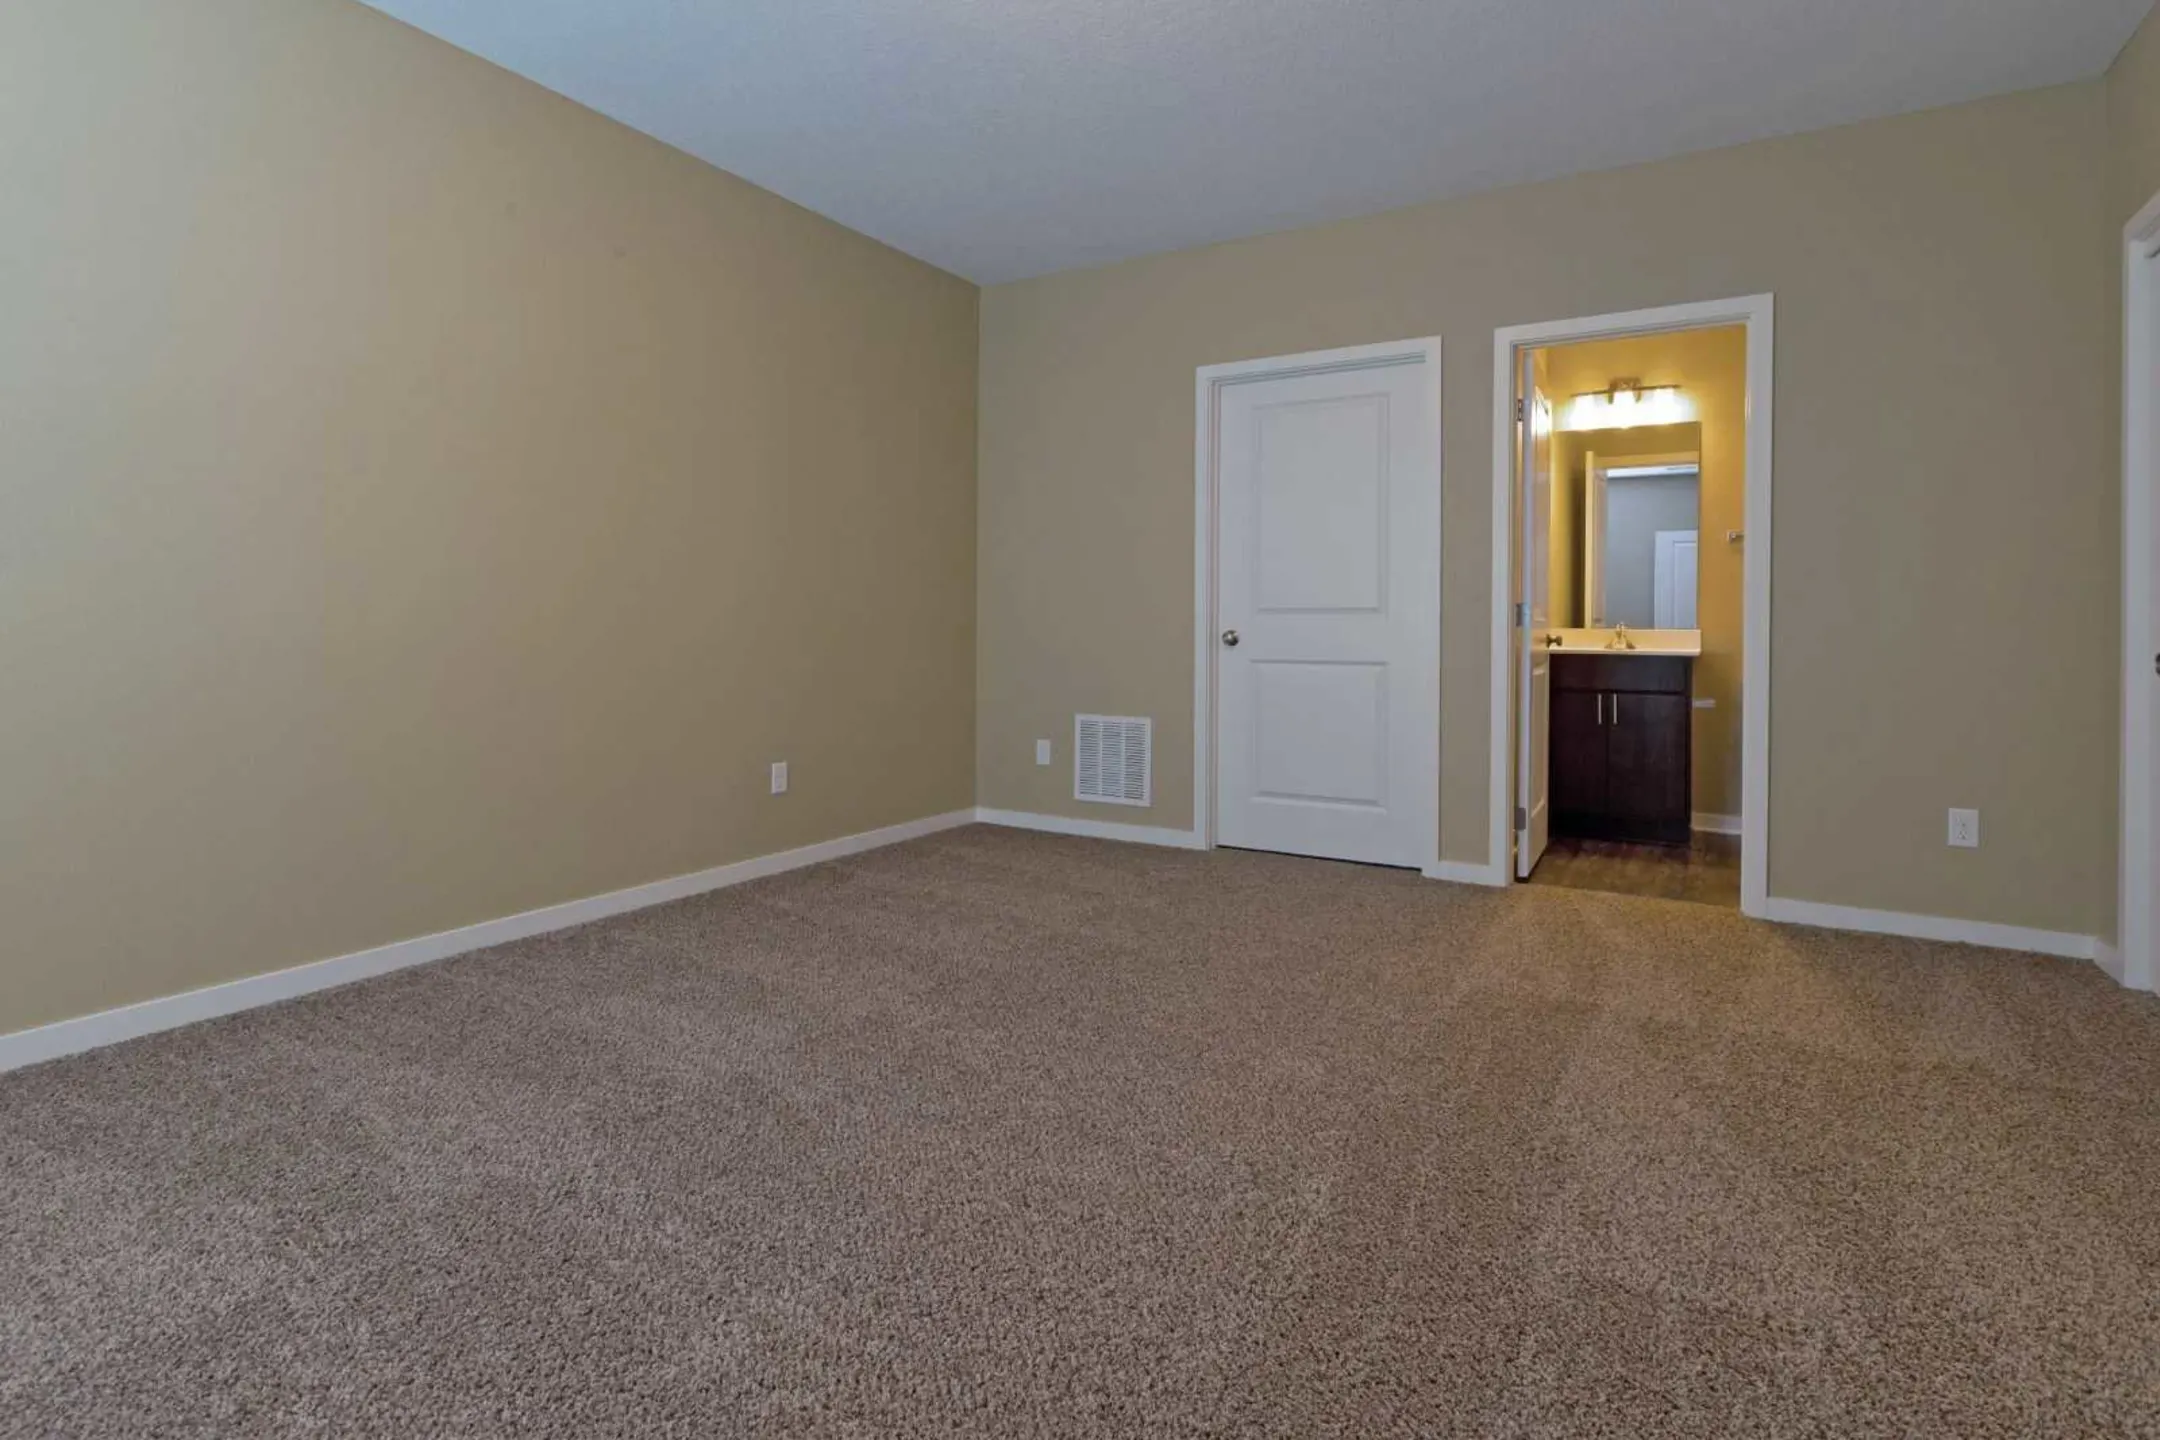 Bedroom - Greenway Square - West Des Moines, IA